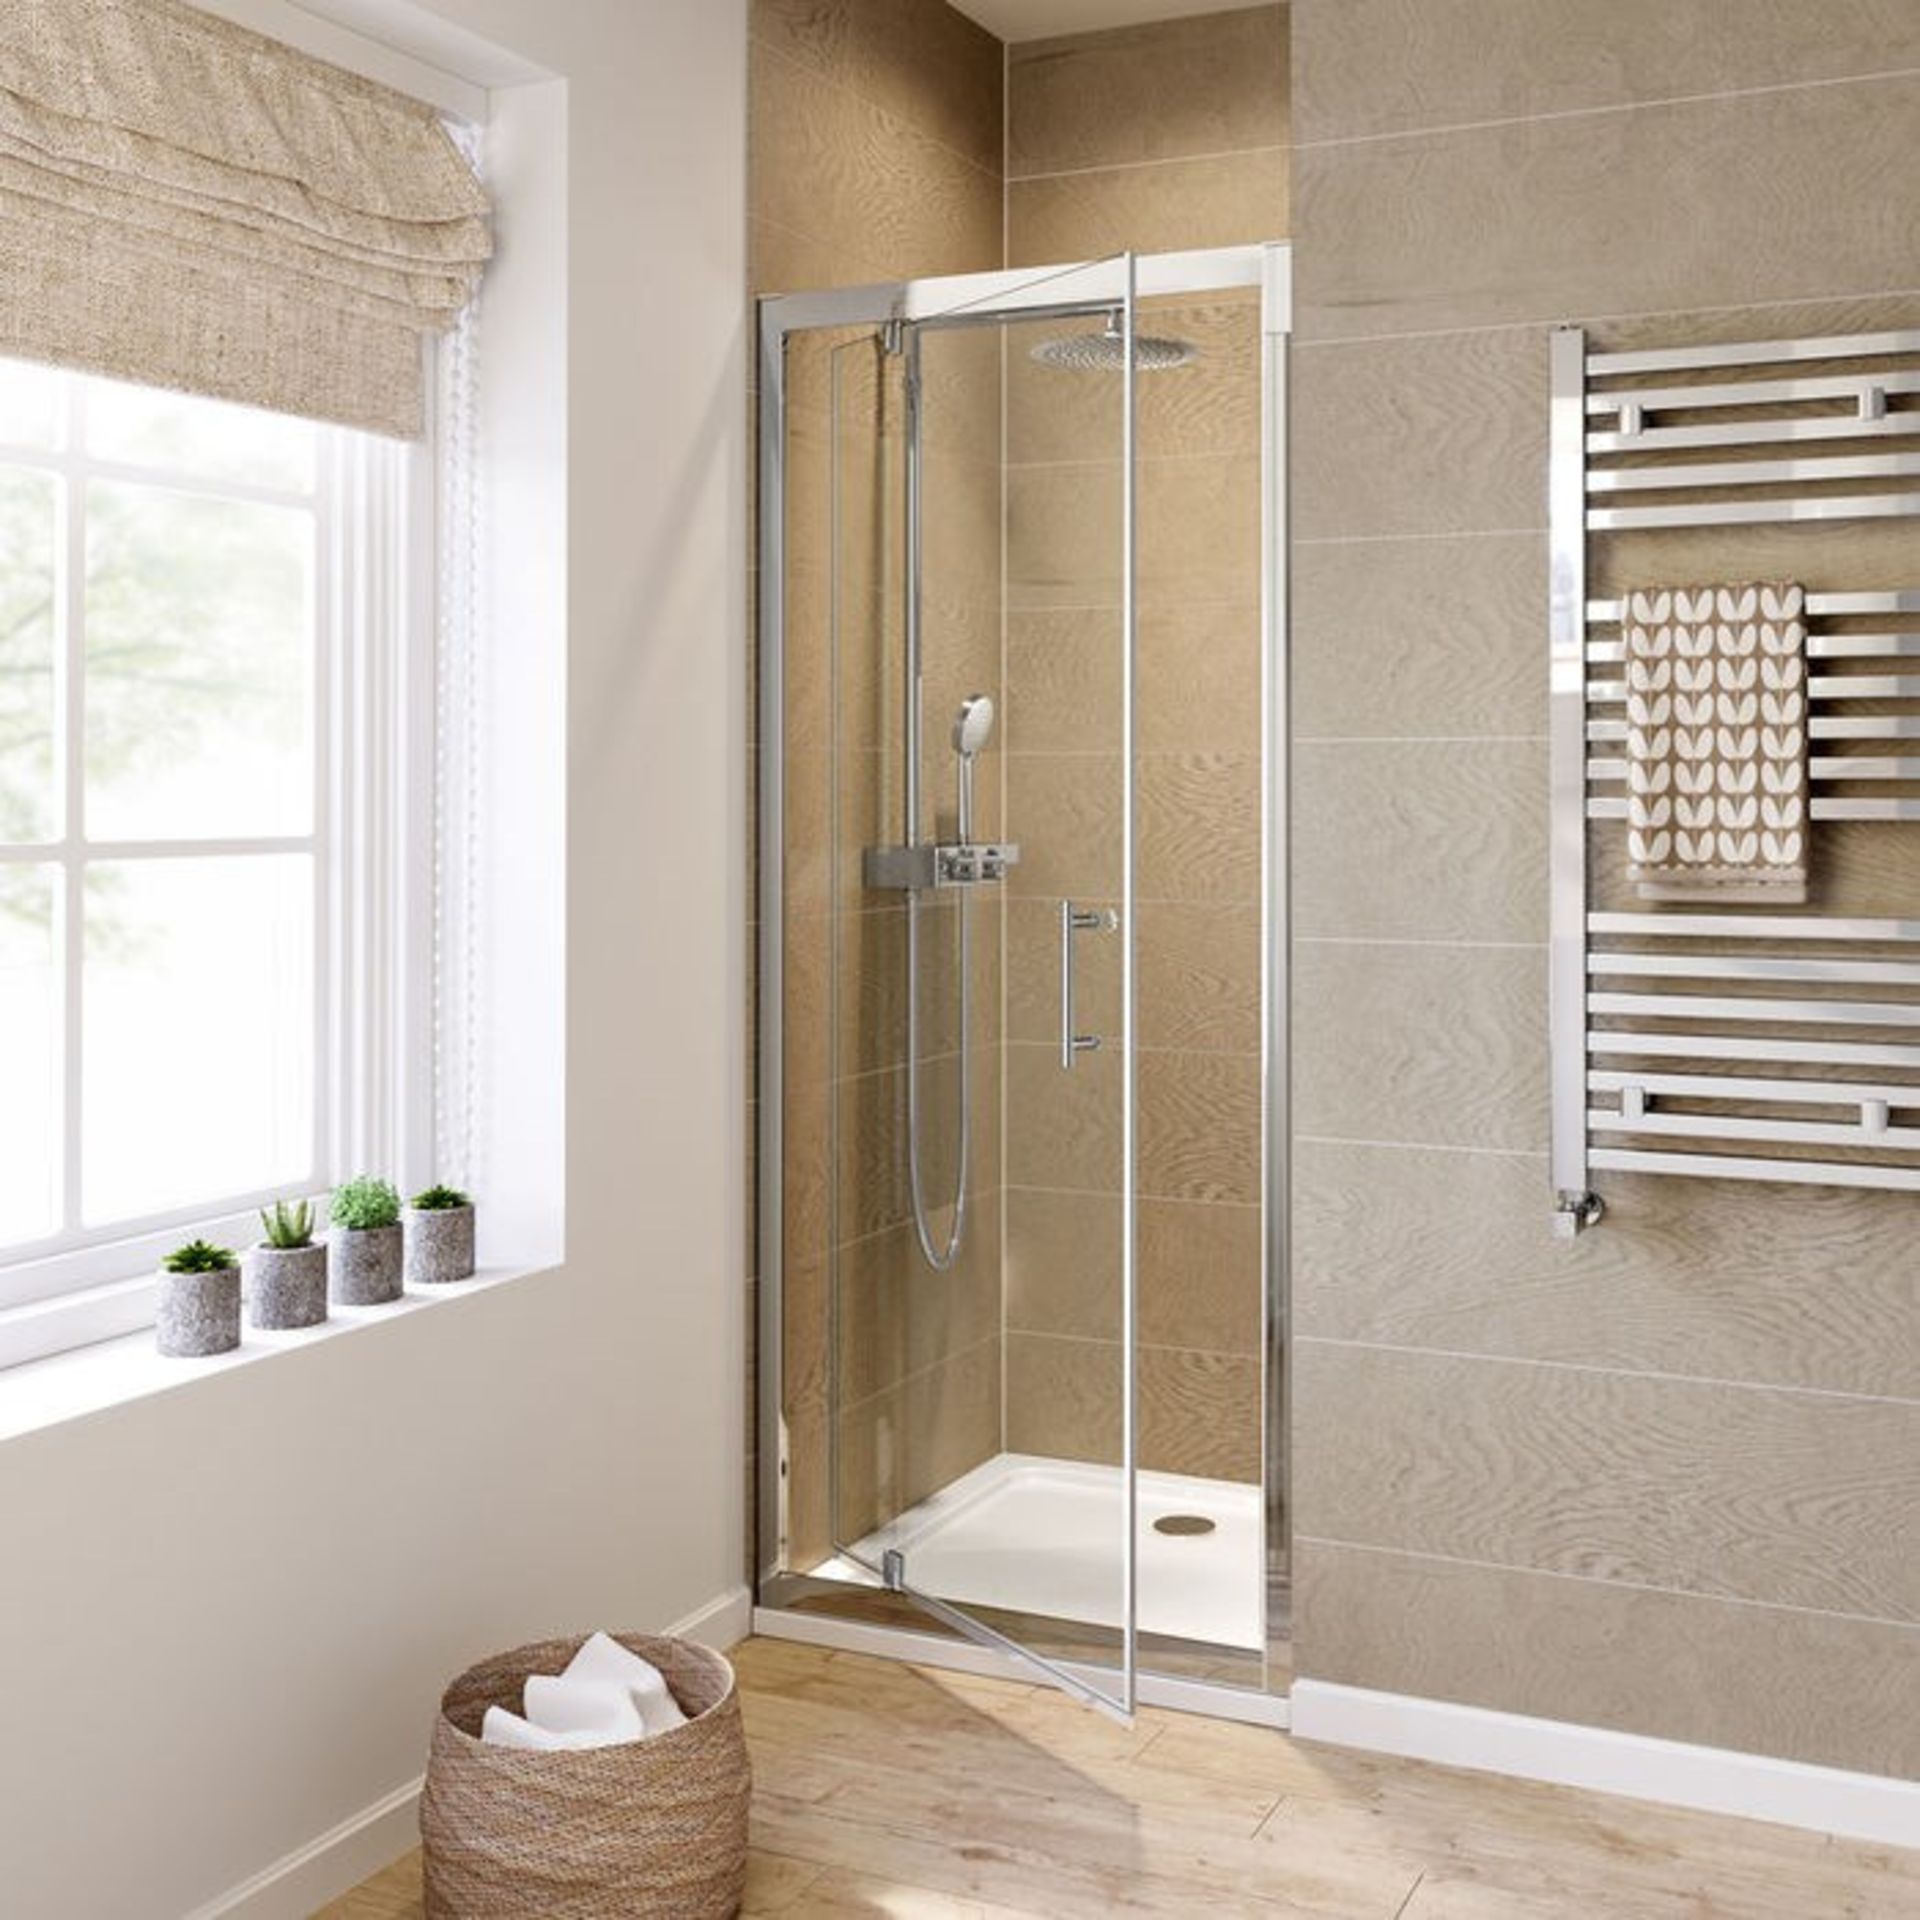 Twyfords 700mm - 6mm - Premium Pivot Shower Door. RRP £299.99.8mm Safety Glass Fully waterpro... - Image 2 of 3